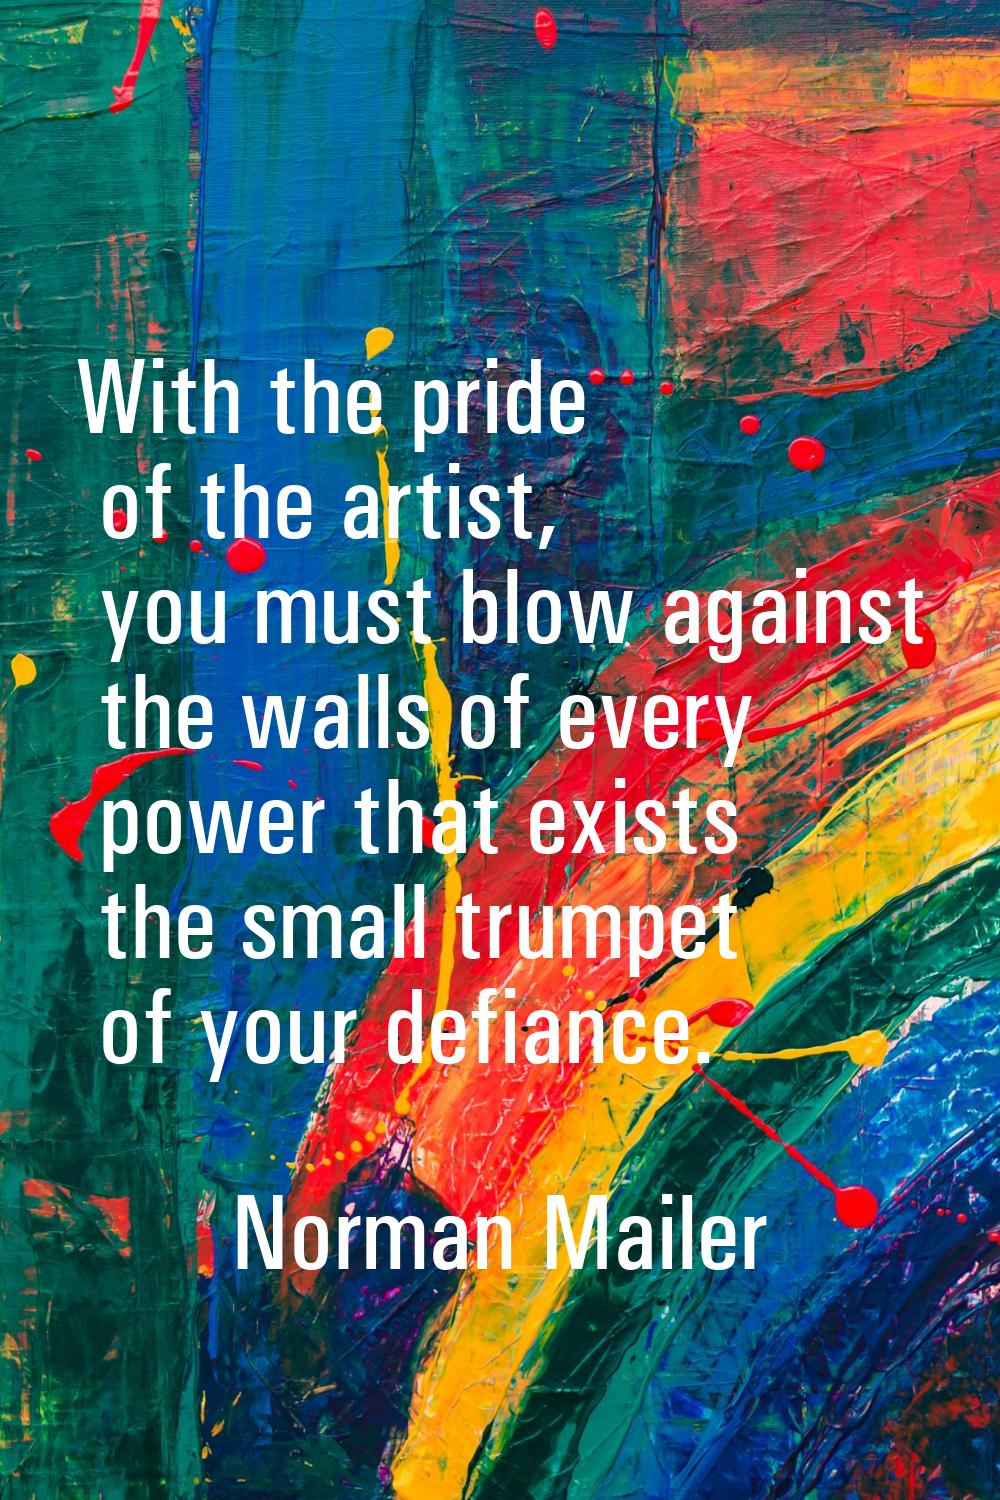 With the pride of the artist, you must blow against the walls of every power that exists the small 